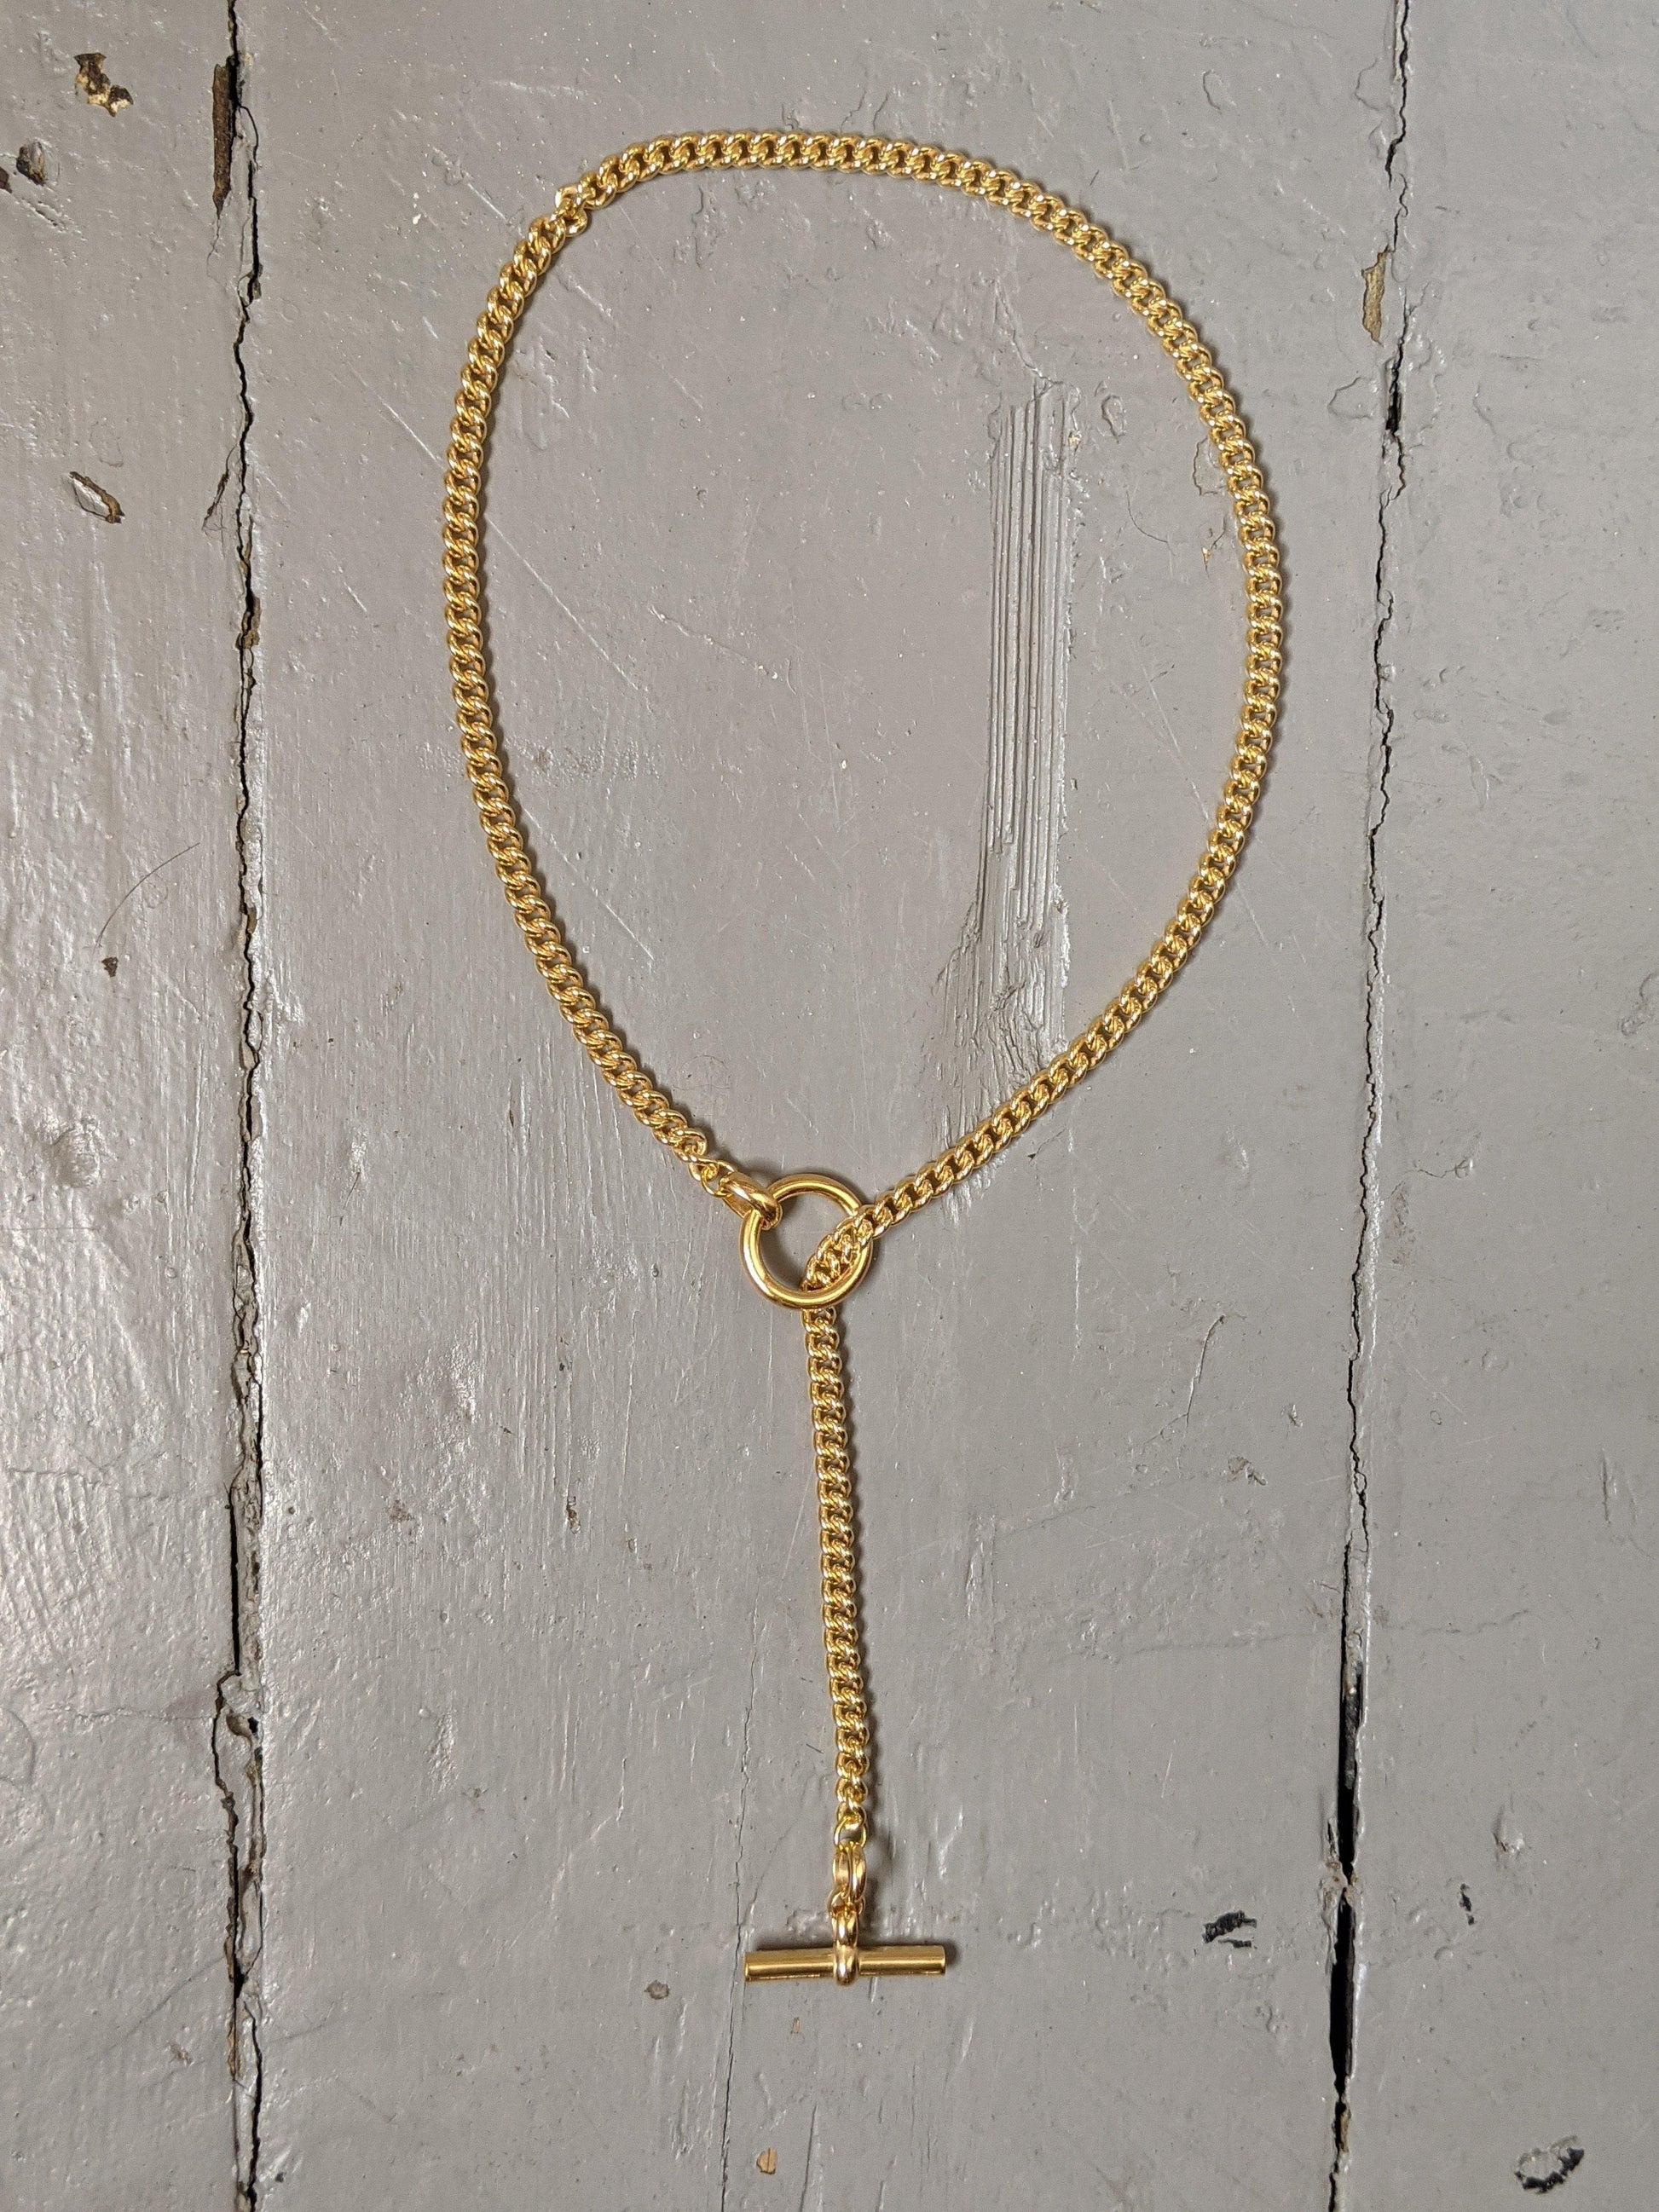 tilly sveaas gold curb chain lariat necklace